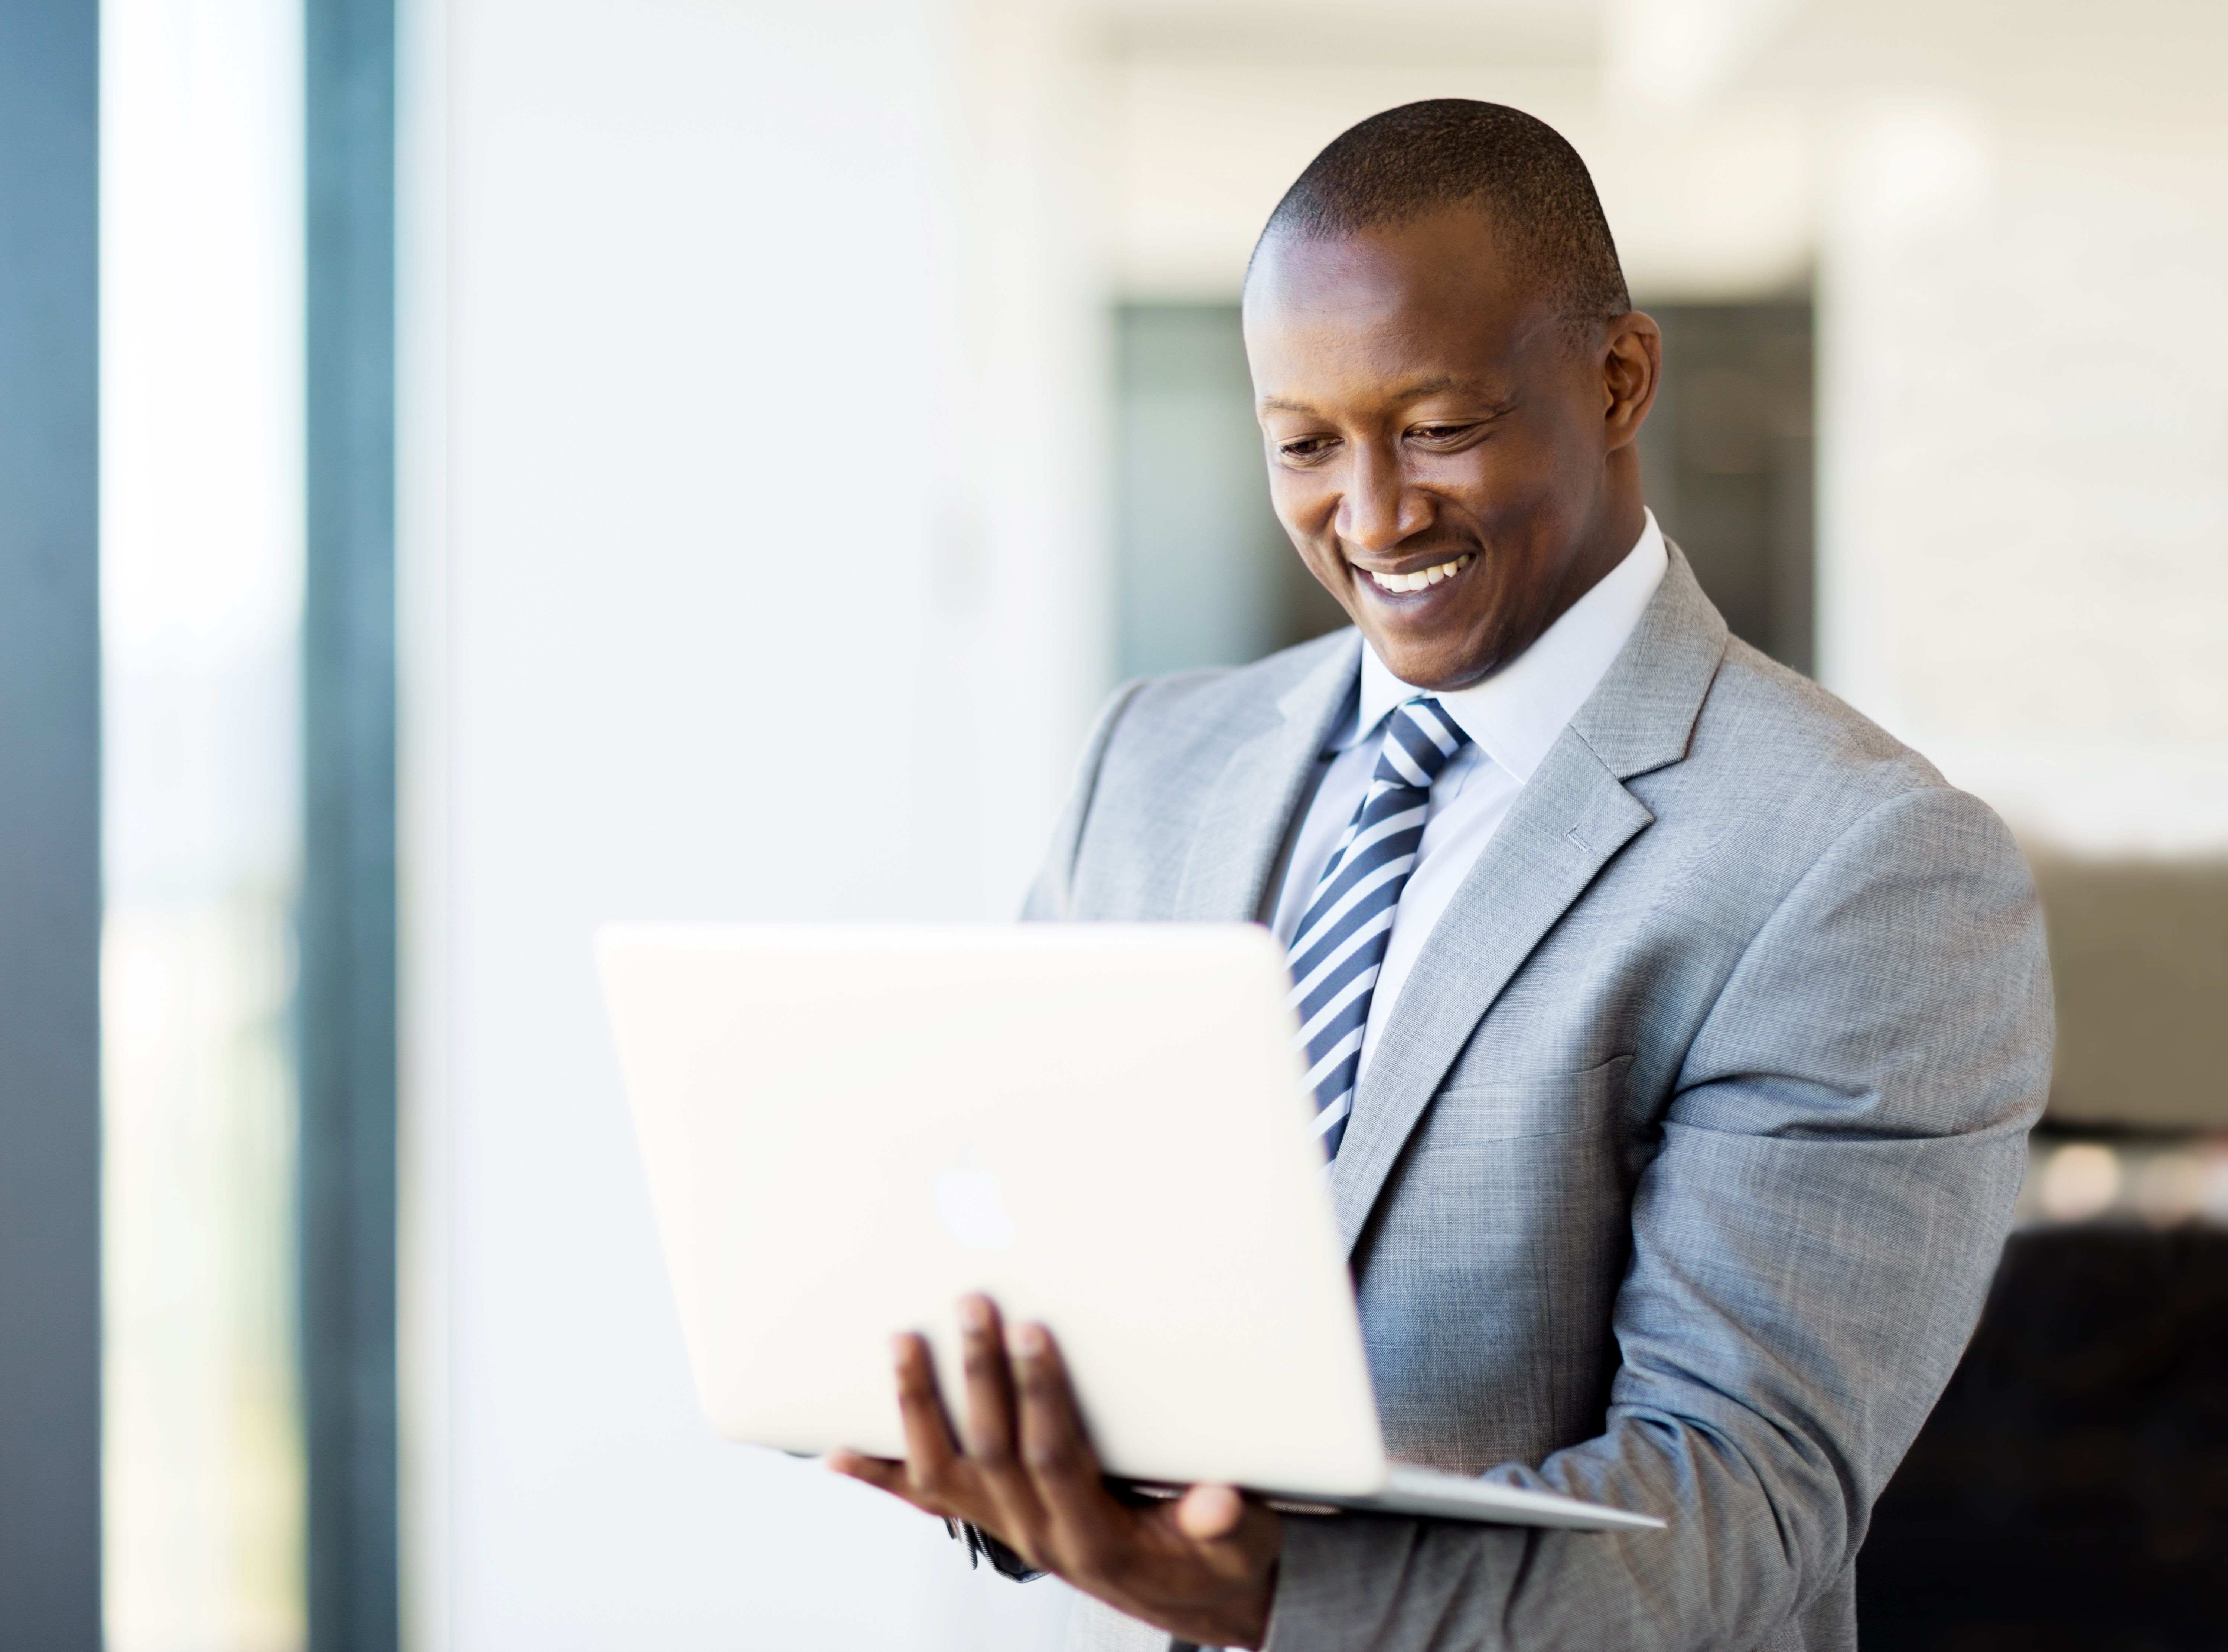 Smiling businessman cradling laptop in left arm while entering content with right hand